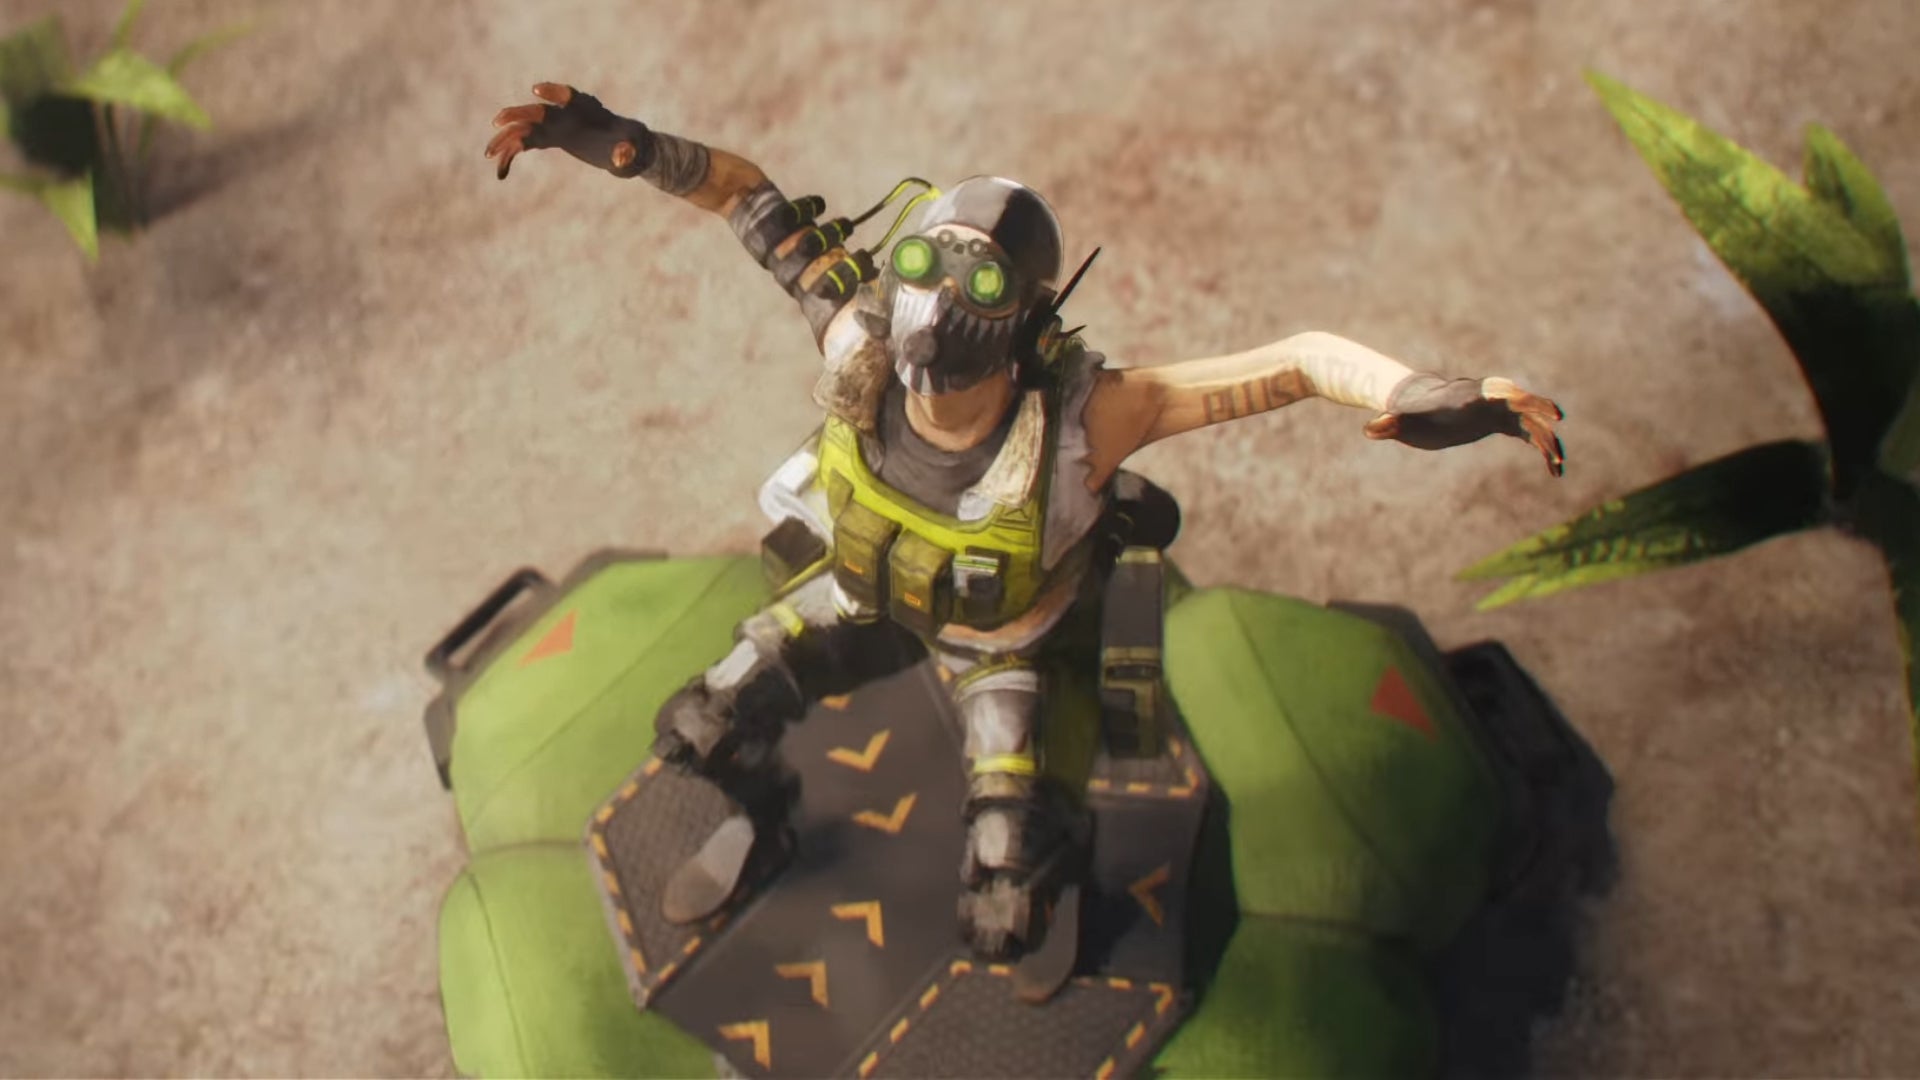 Octane bounces off his Launch Pad into the air in Apex Legends.